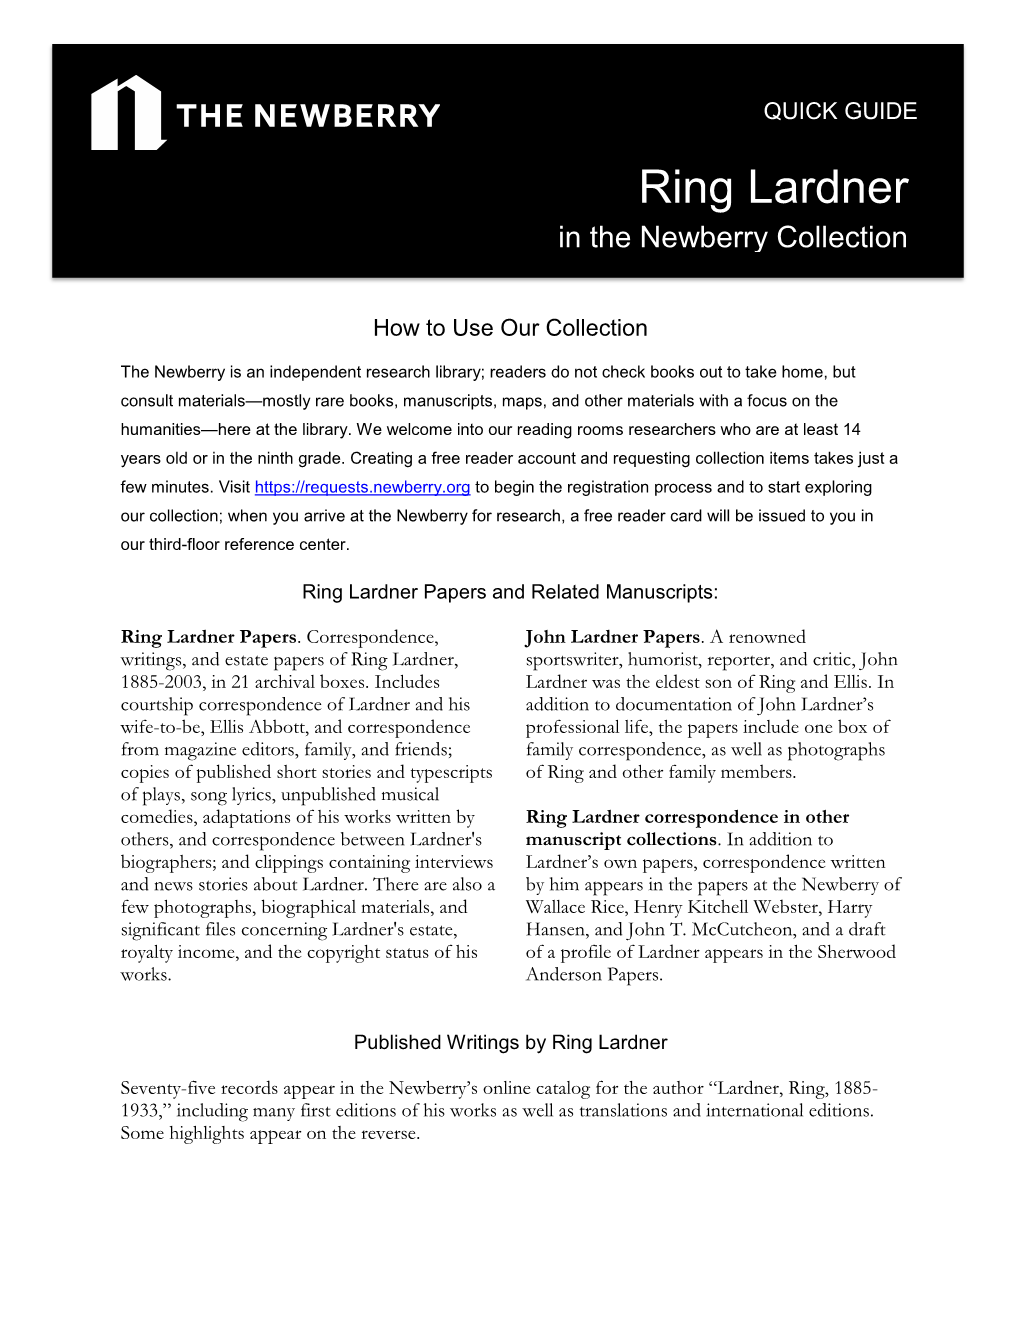 Ring Lardner in the Newberry Collection